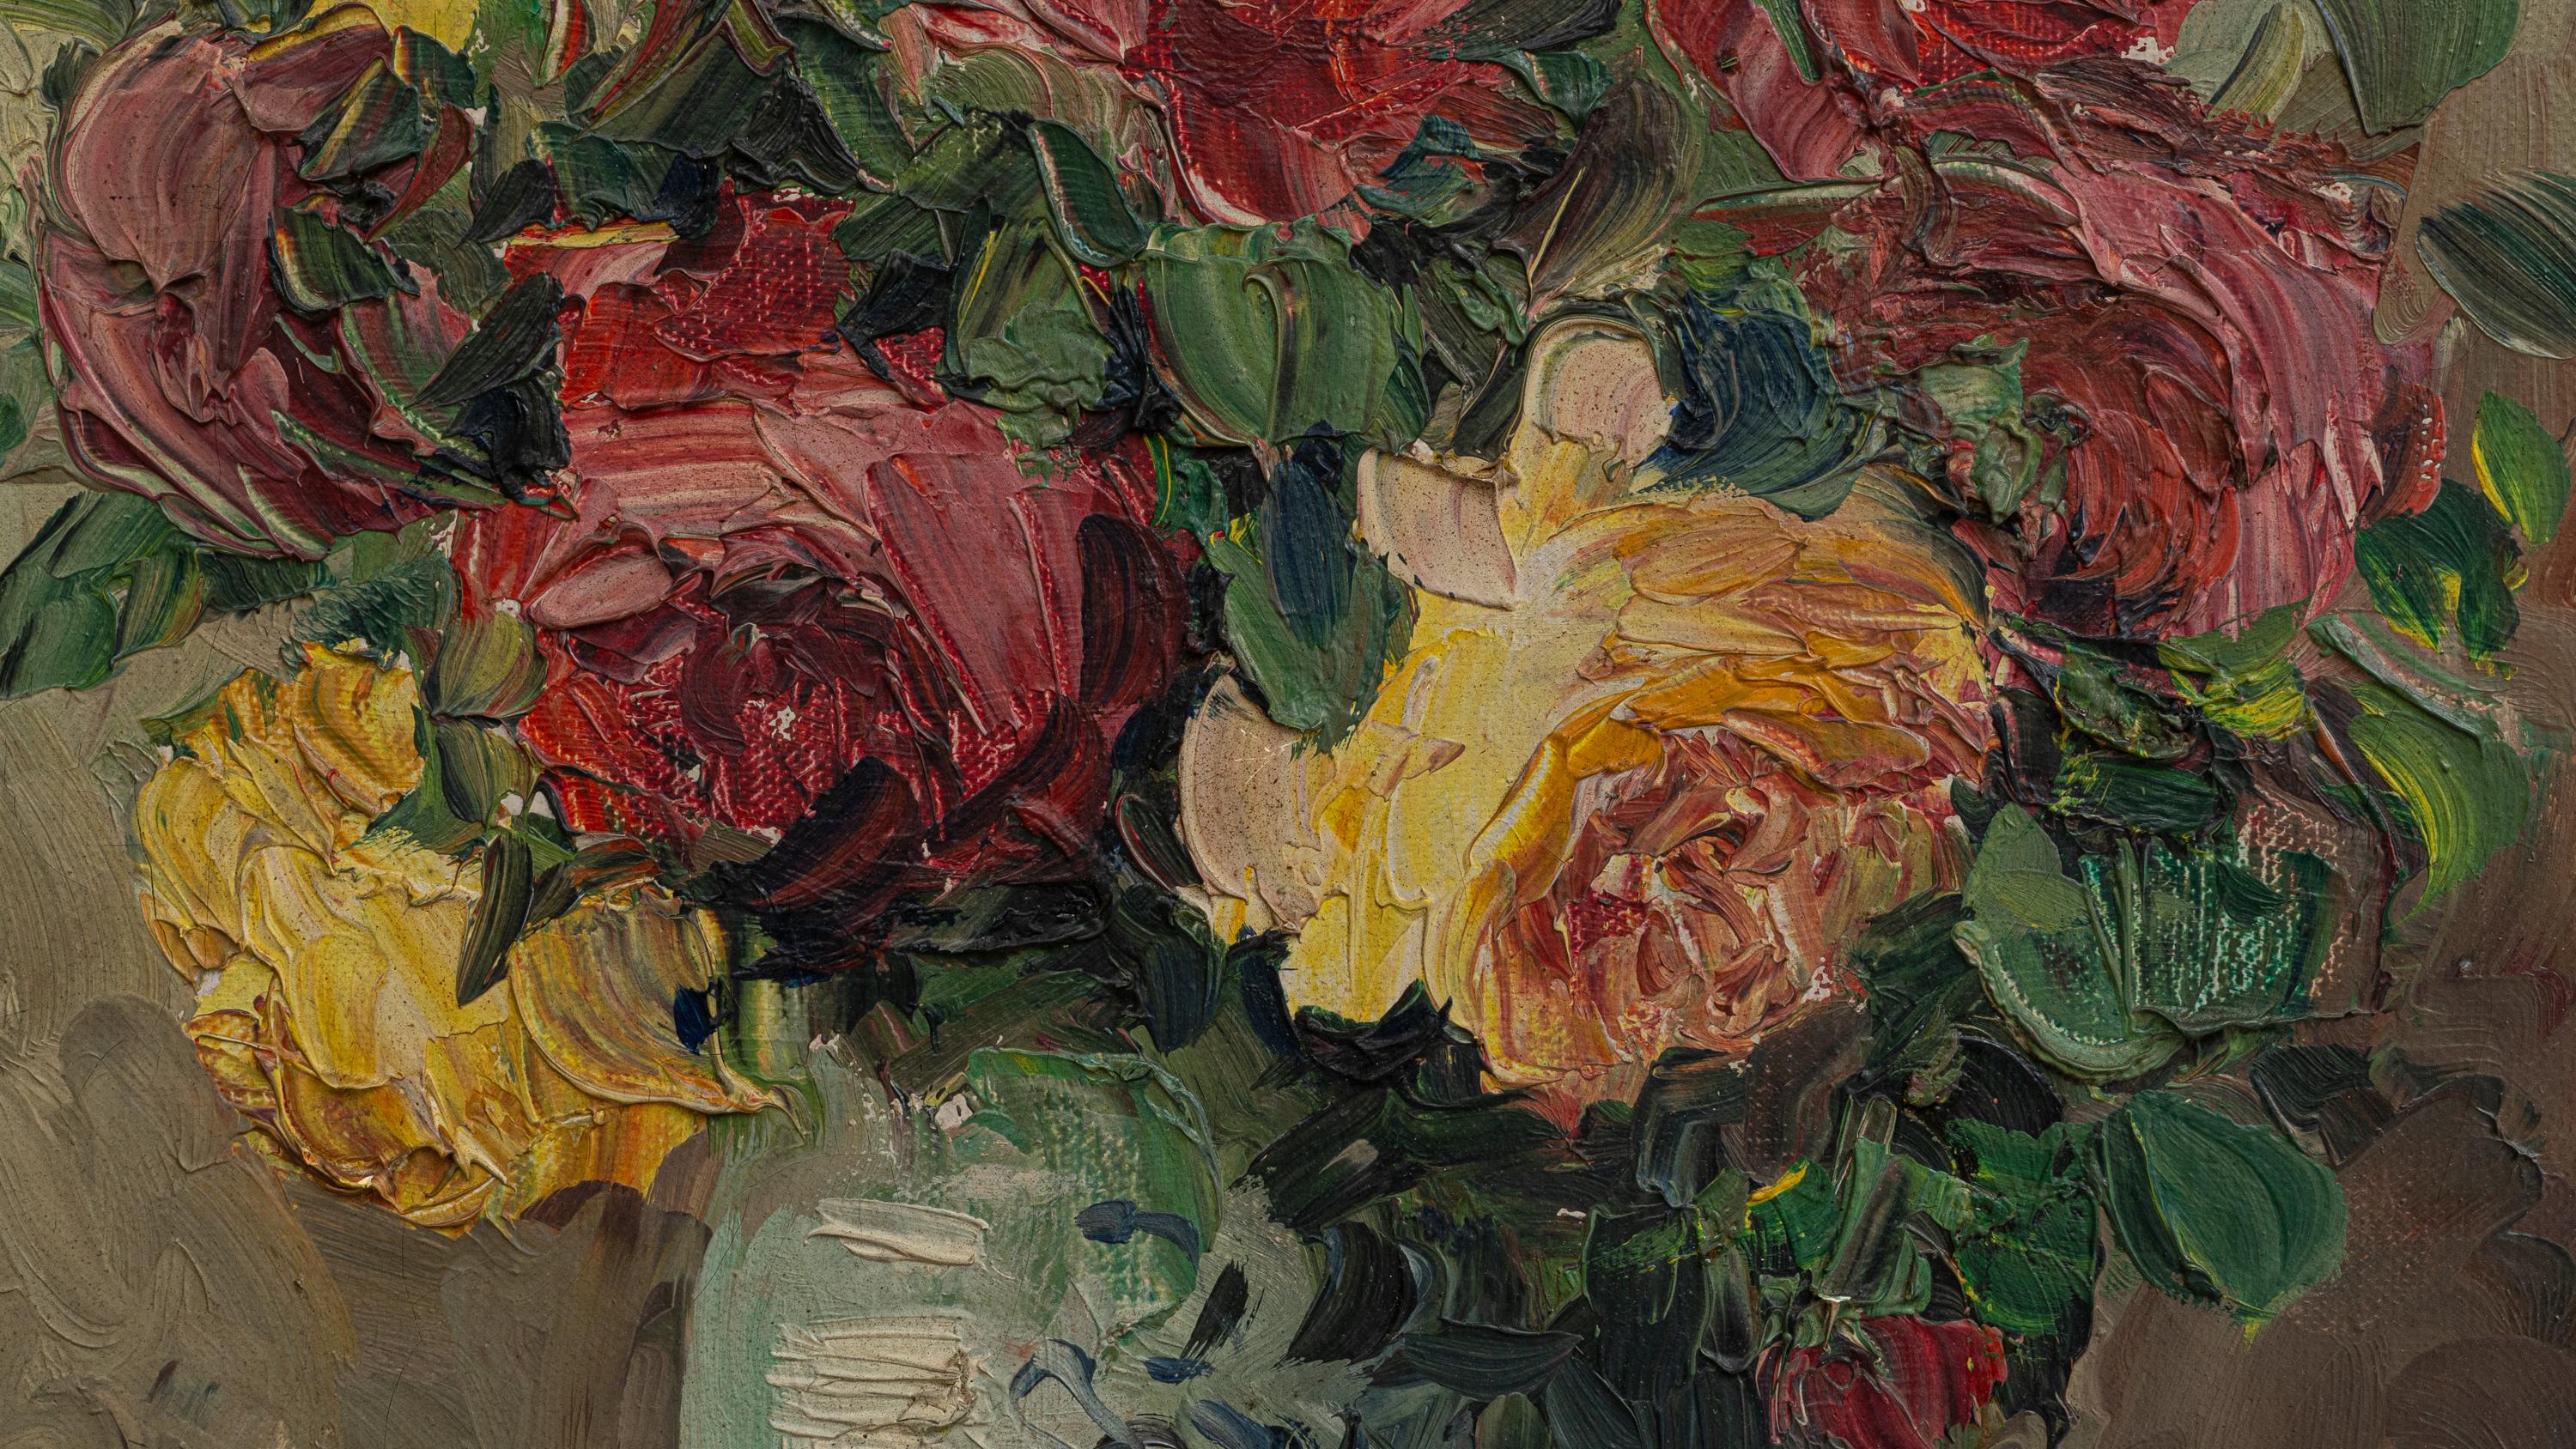 This striking 20th Century Belgian painting exudes vibrancy and passion through its lush depiction of a bouquet of roses in full bloom. The artist's use of thick, expressive brush strokes and rich, vivid colors brings each petal to life, ranging